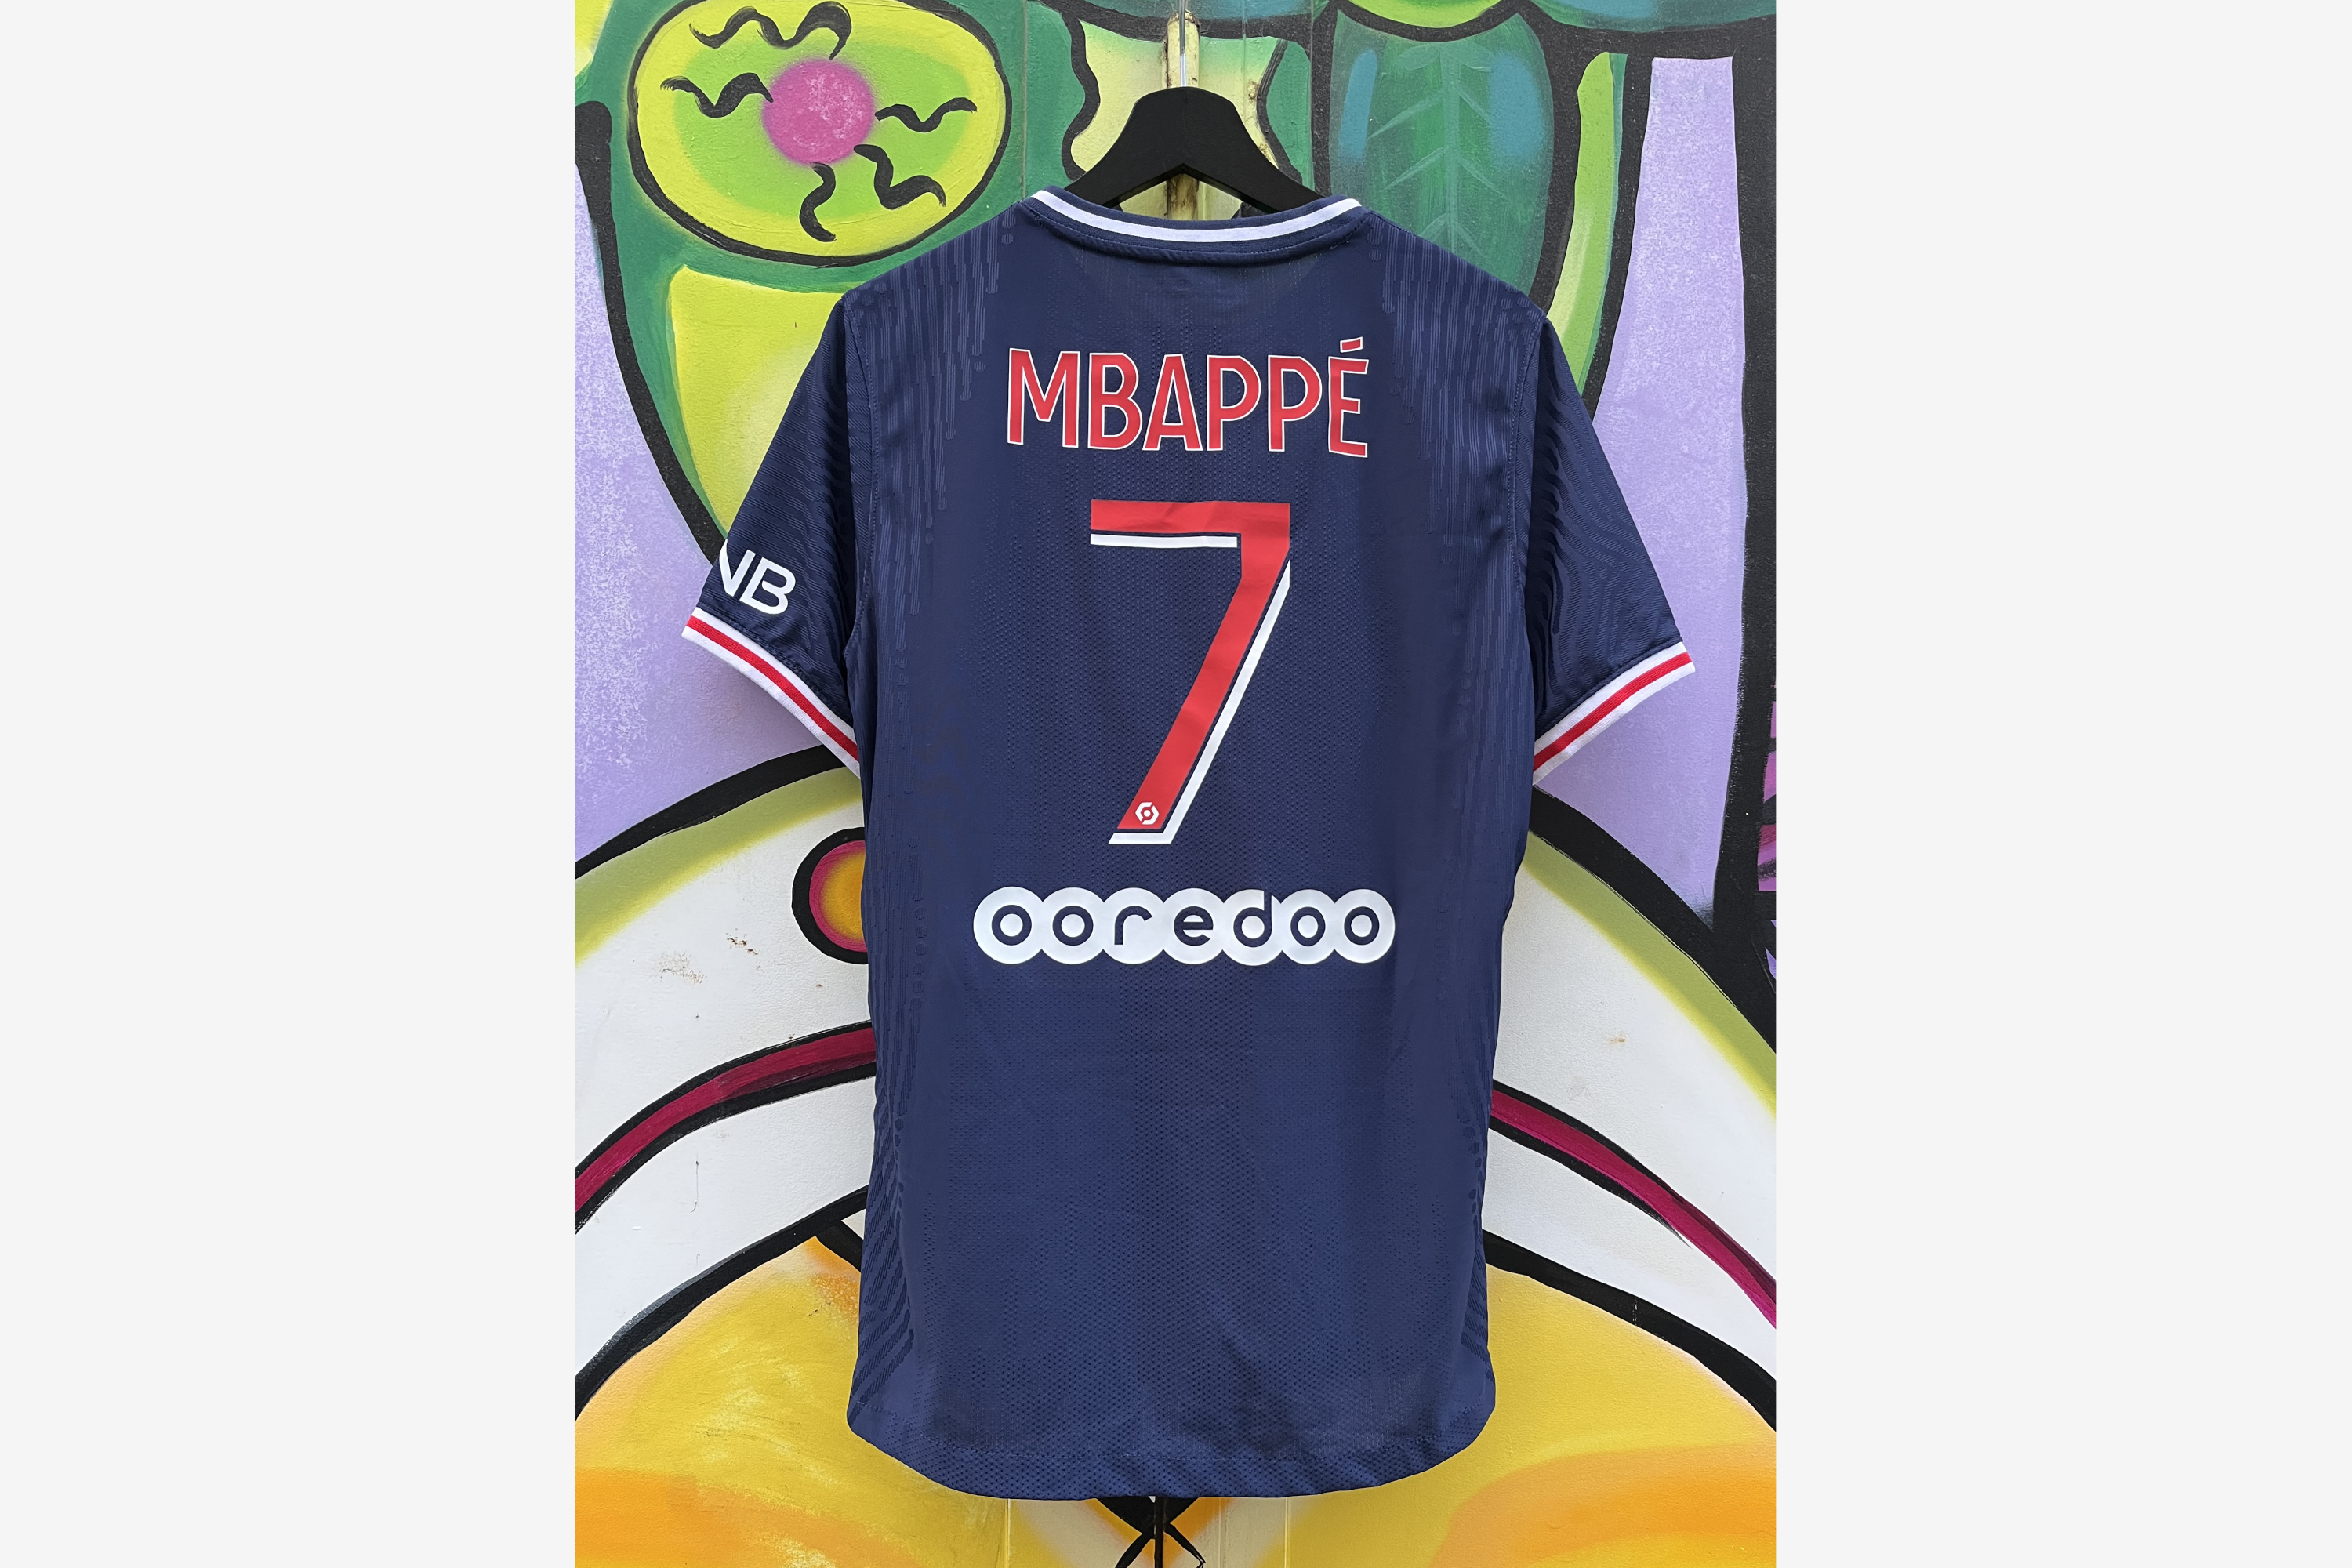 Nike - PSG 2020/21 Home Football Shirt 'MBAPPÉ' (Player Issue)